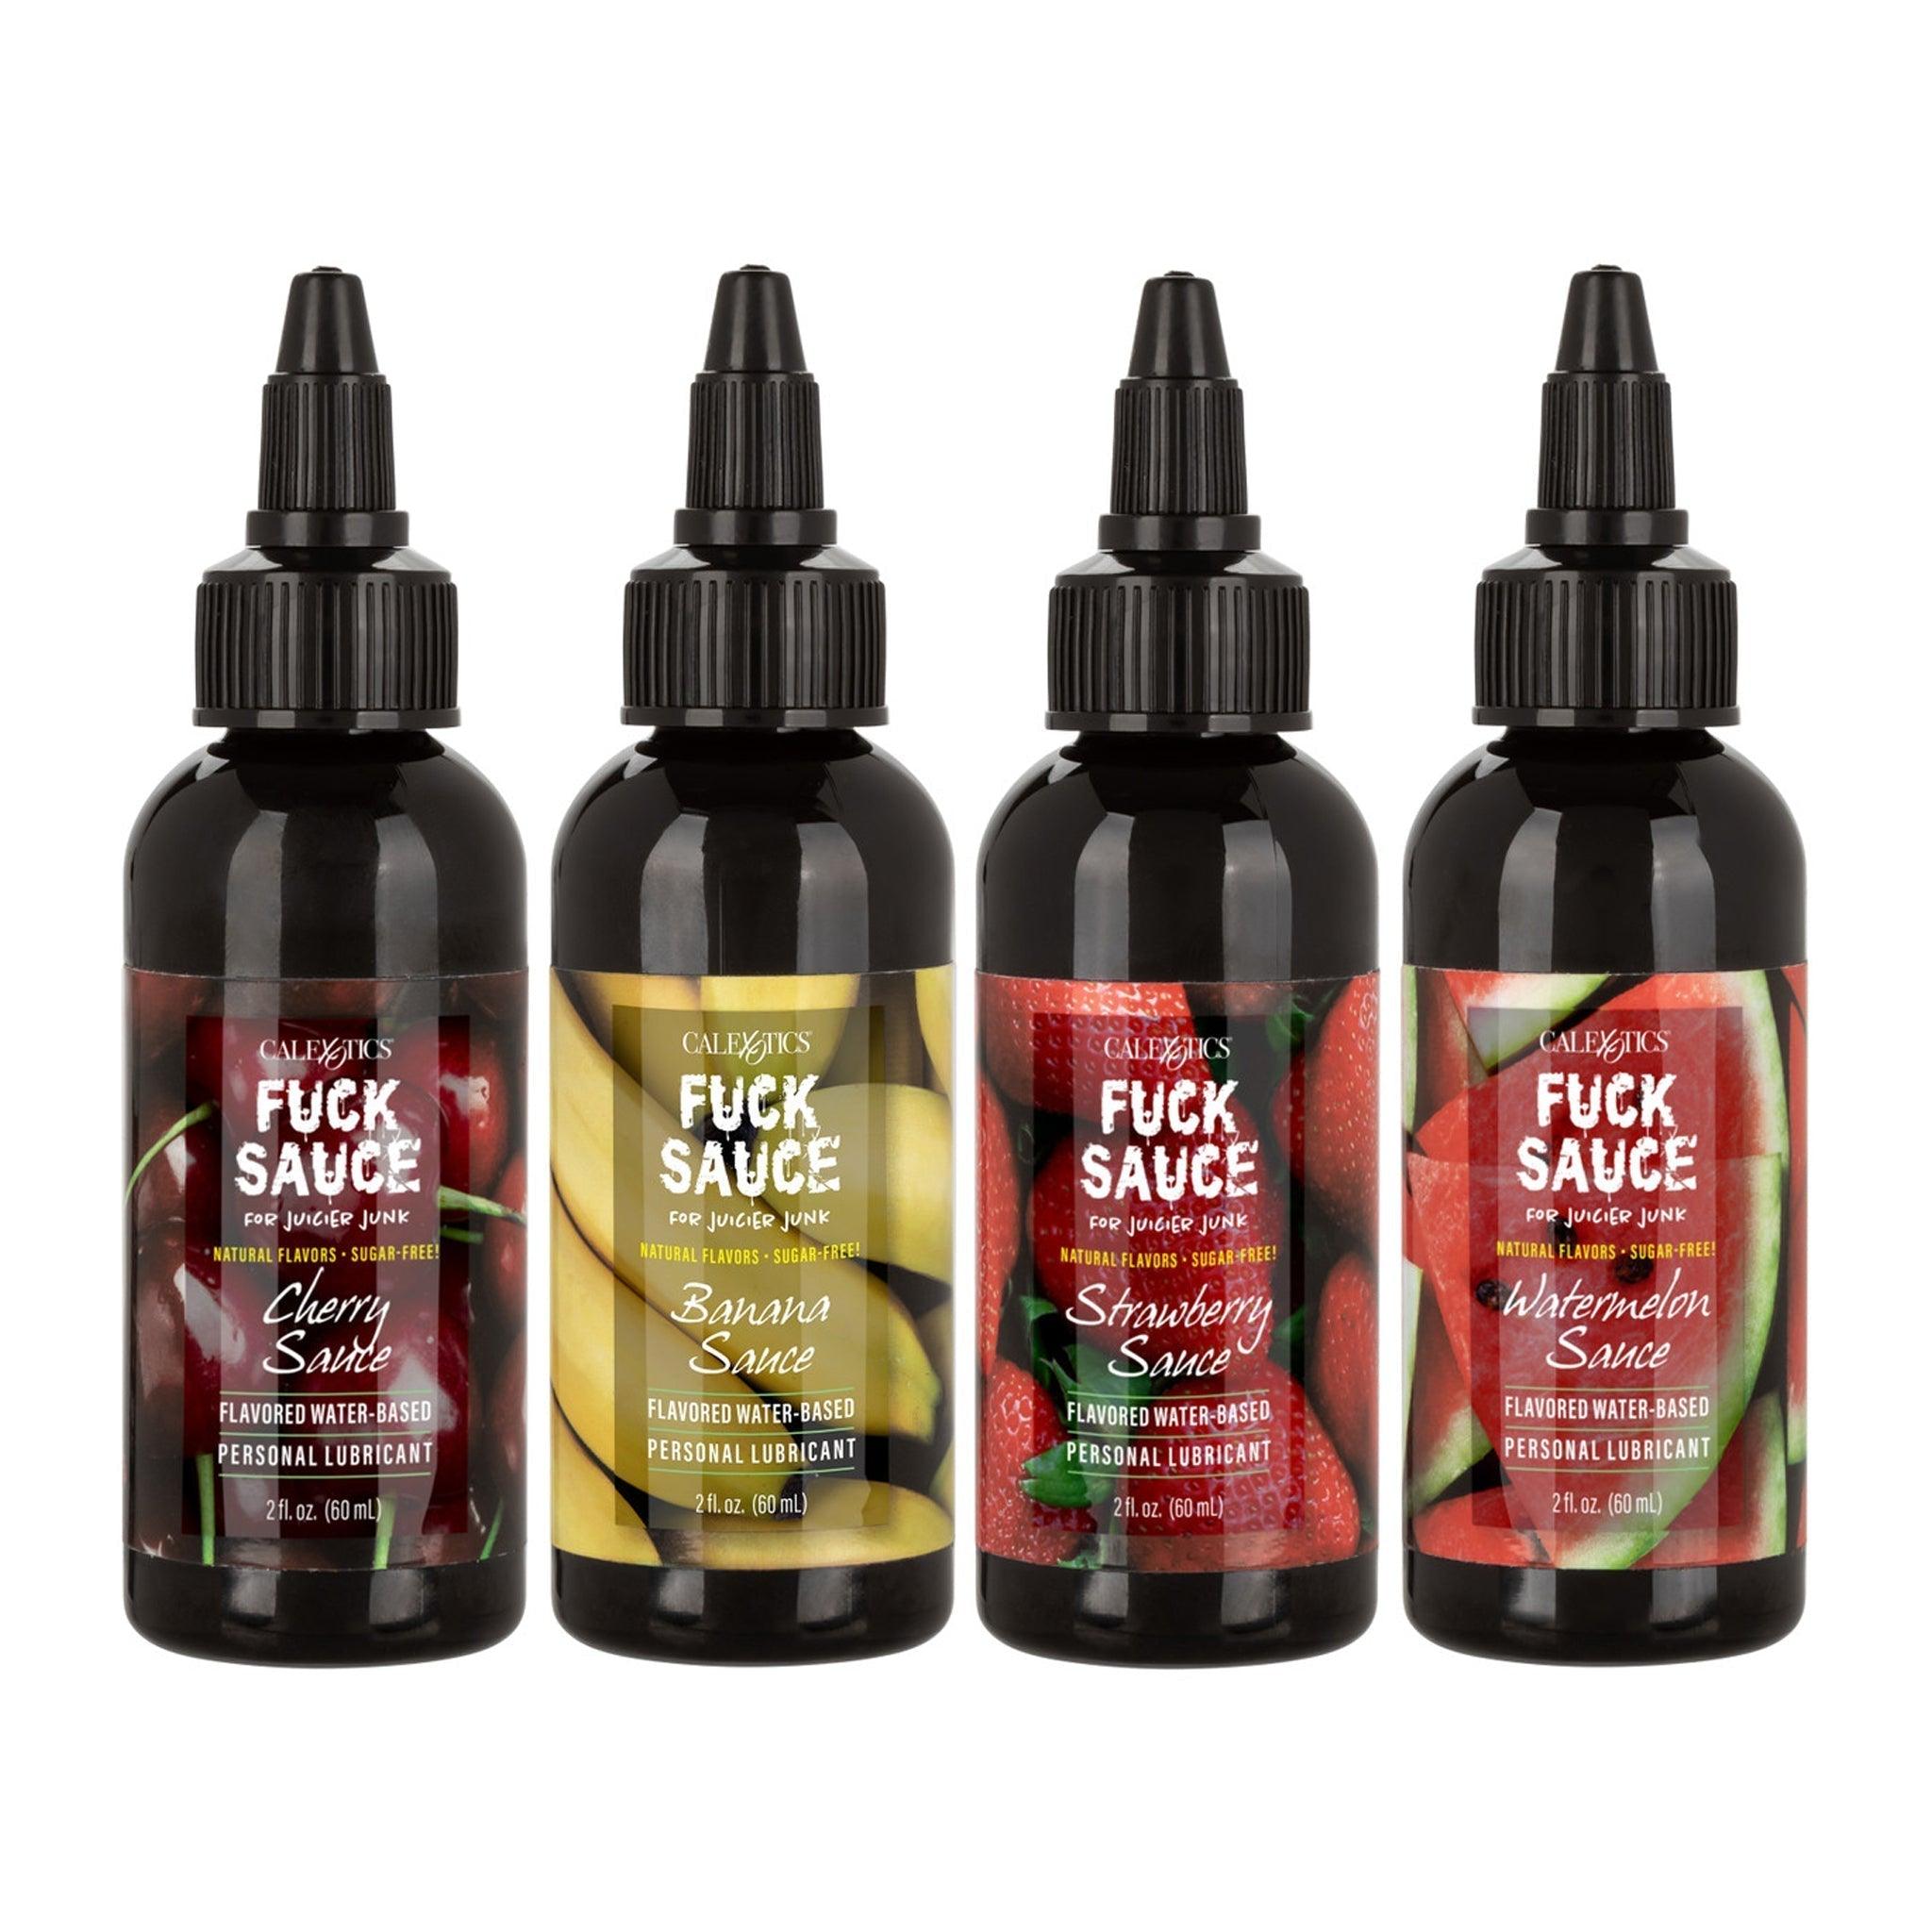 Fuck Sauce Flavored Water-Based Personal Lubricant Variety 4 Pack 2oz (60 mL) - CheapLubes.com